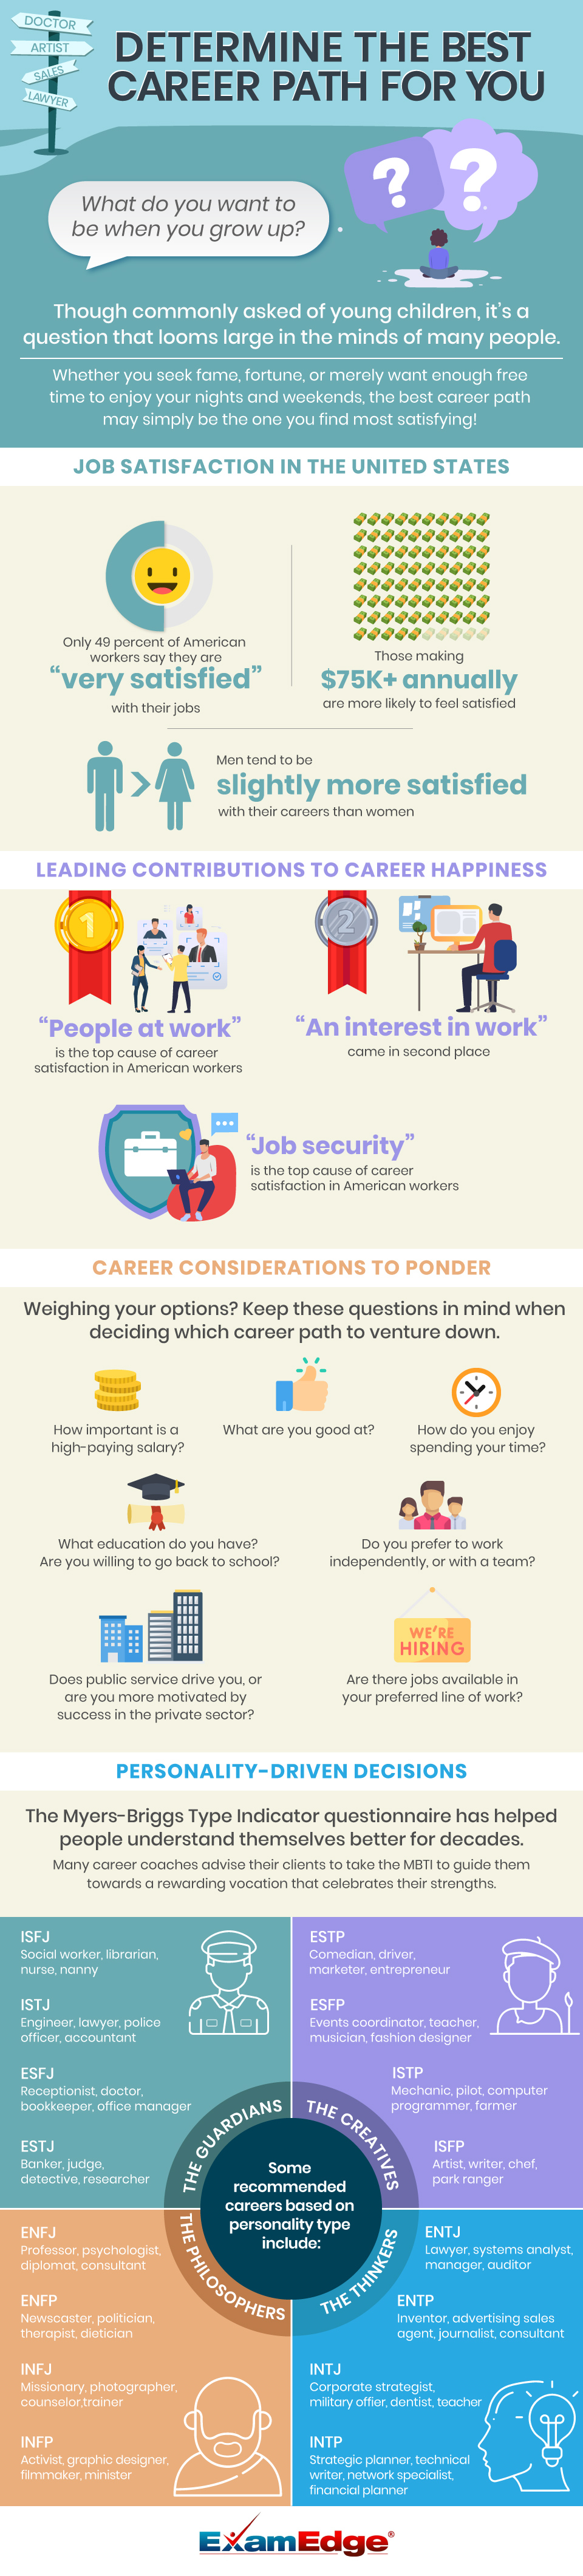 Determine the Best Career Path for You graphic